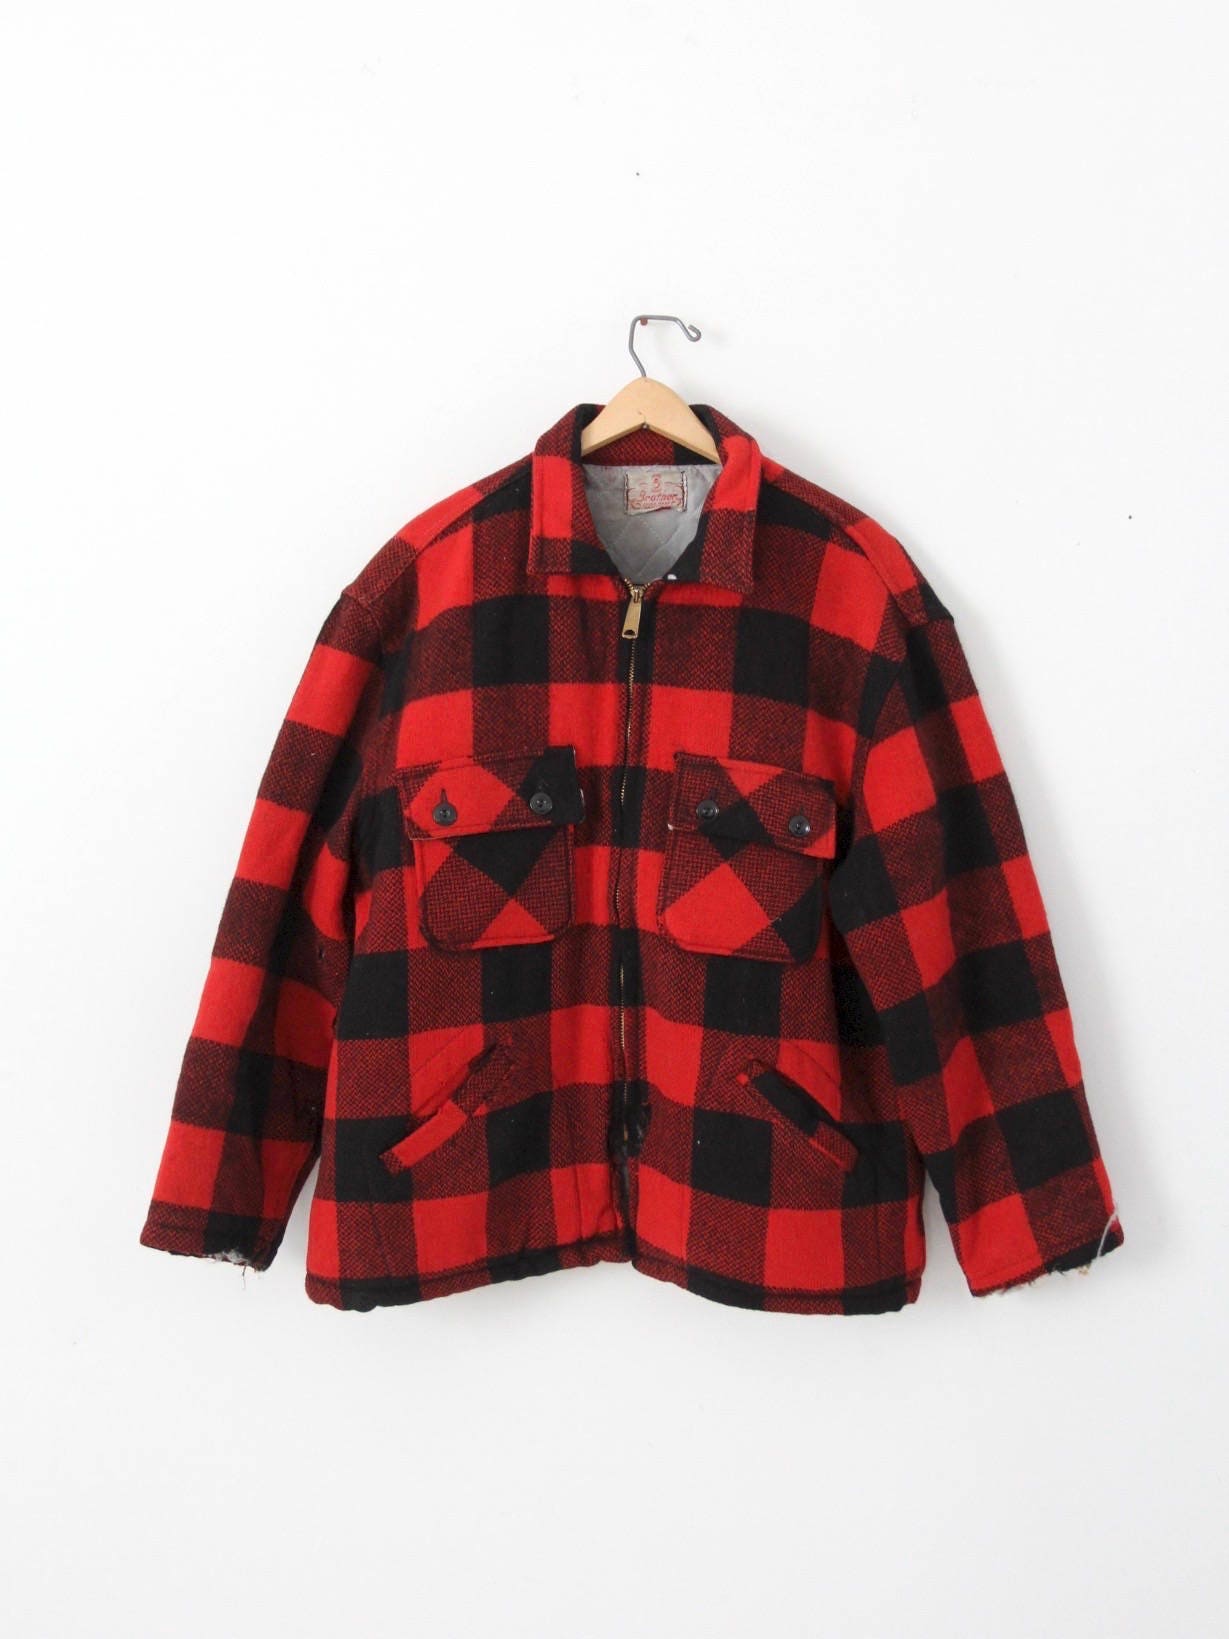 Vintage Plaid Jacket by Brother, Red and Black Plaid Jacket 